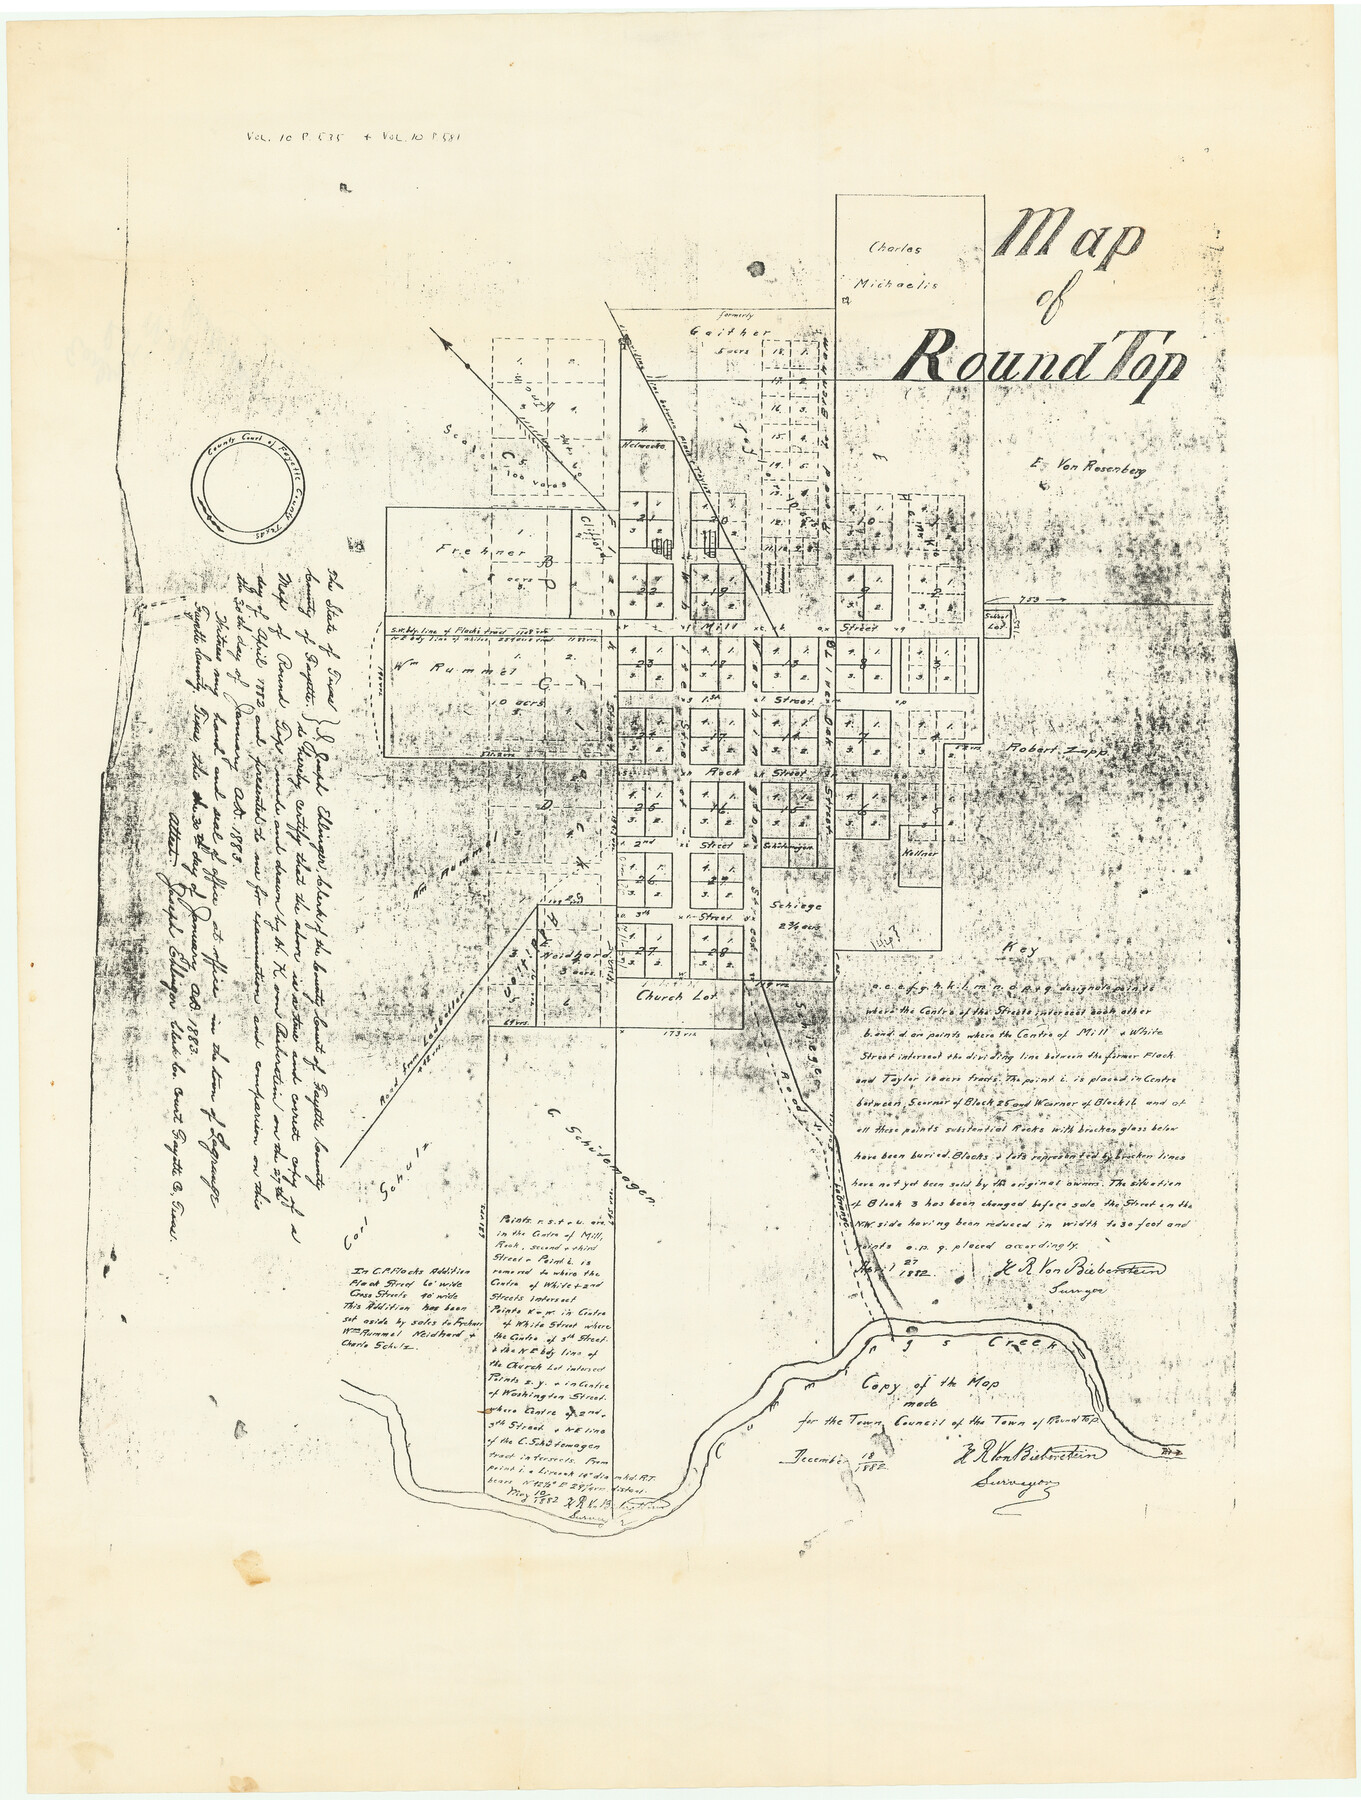 94751, Map of Round Top, Non-GLO Digital Images